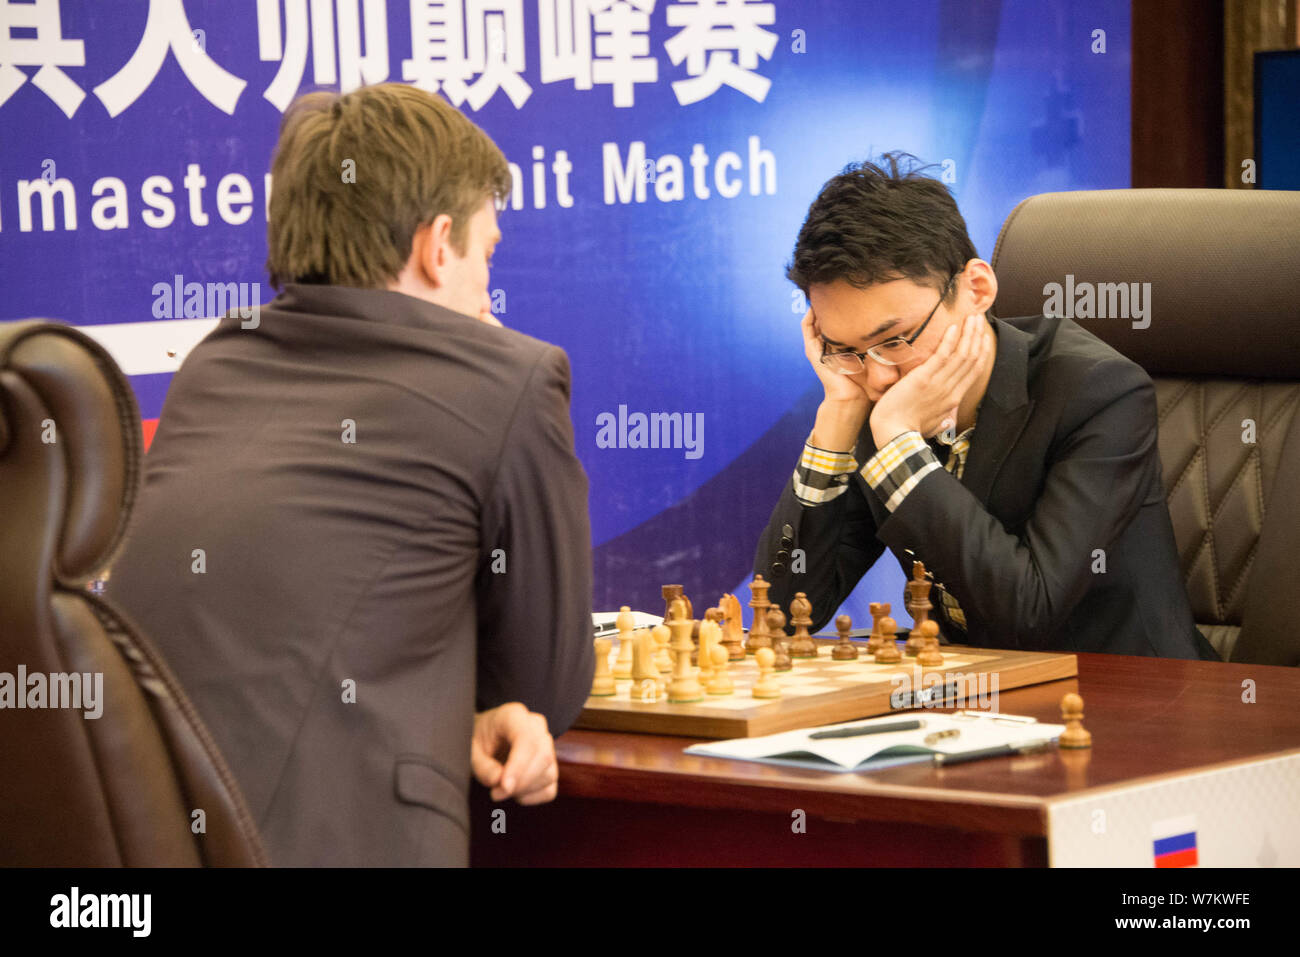 Chinese chess grandmaster Yu Yangyi, right, competes against Russian chess grandmaster Alexander Igorevich Grischuk during the 2017 China-Russian Ches Stock Photo